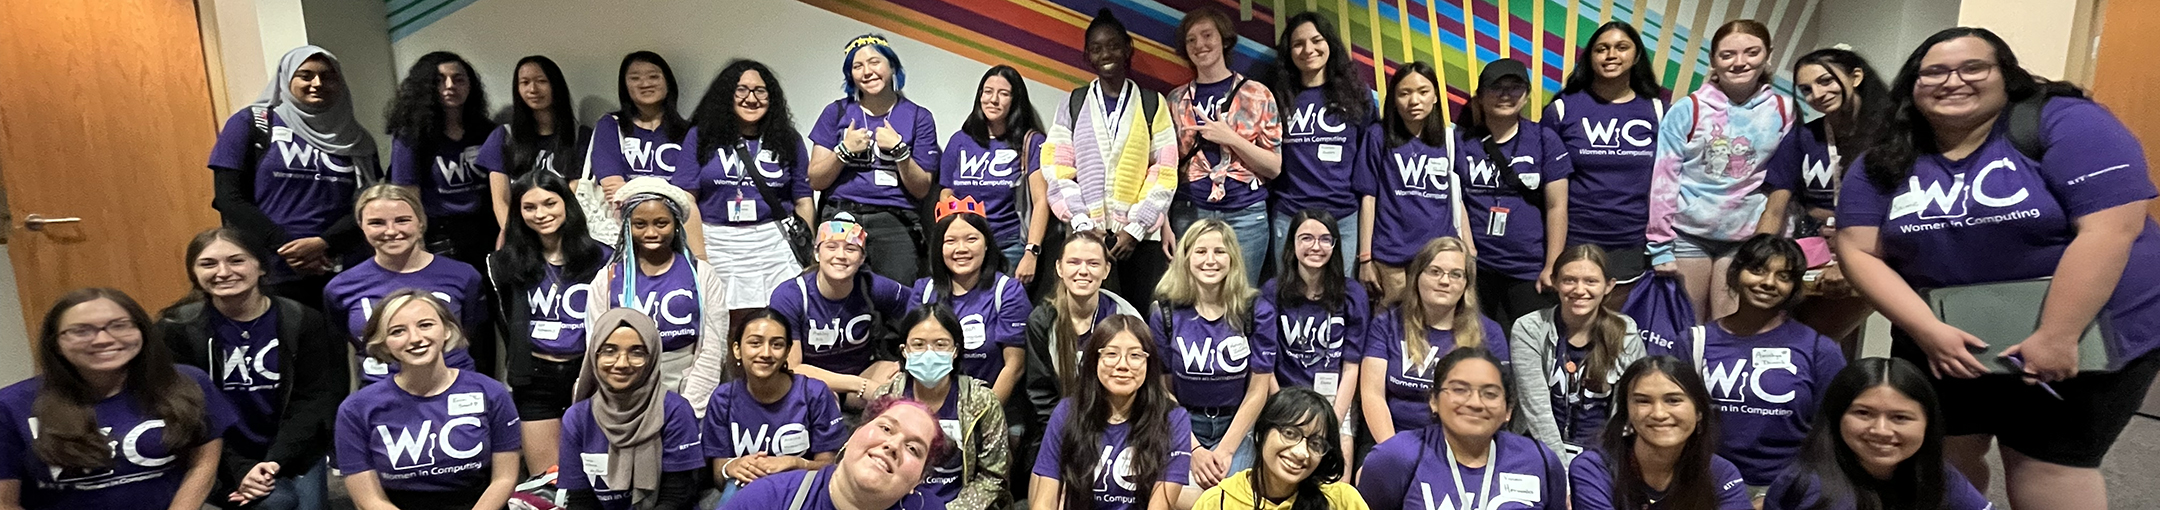 Large number of people posing for a group picture wearing WIC t-shirts